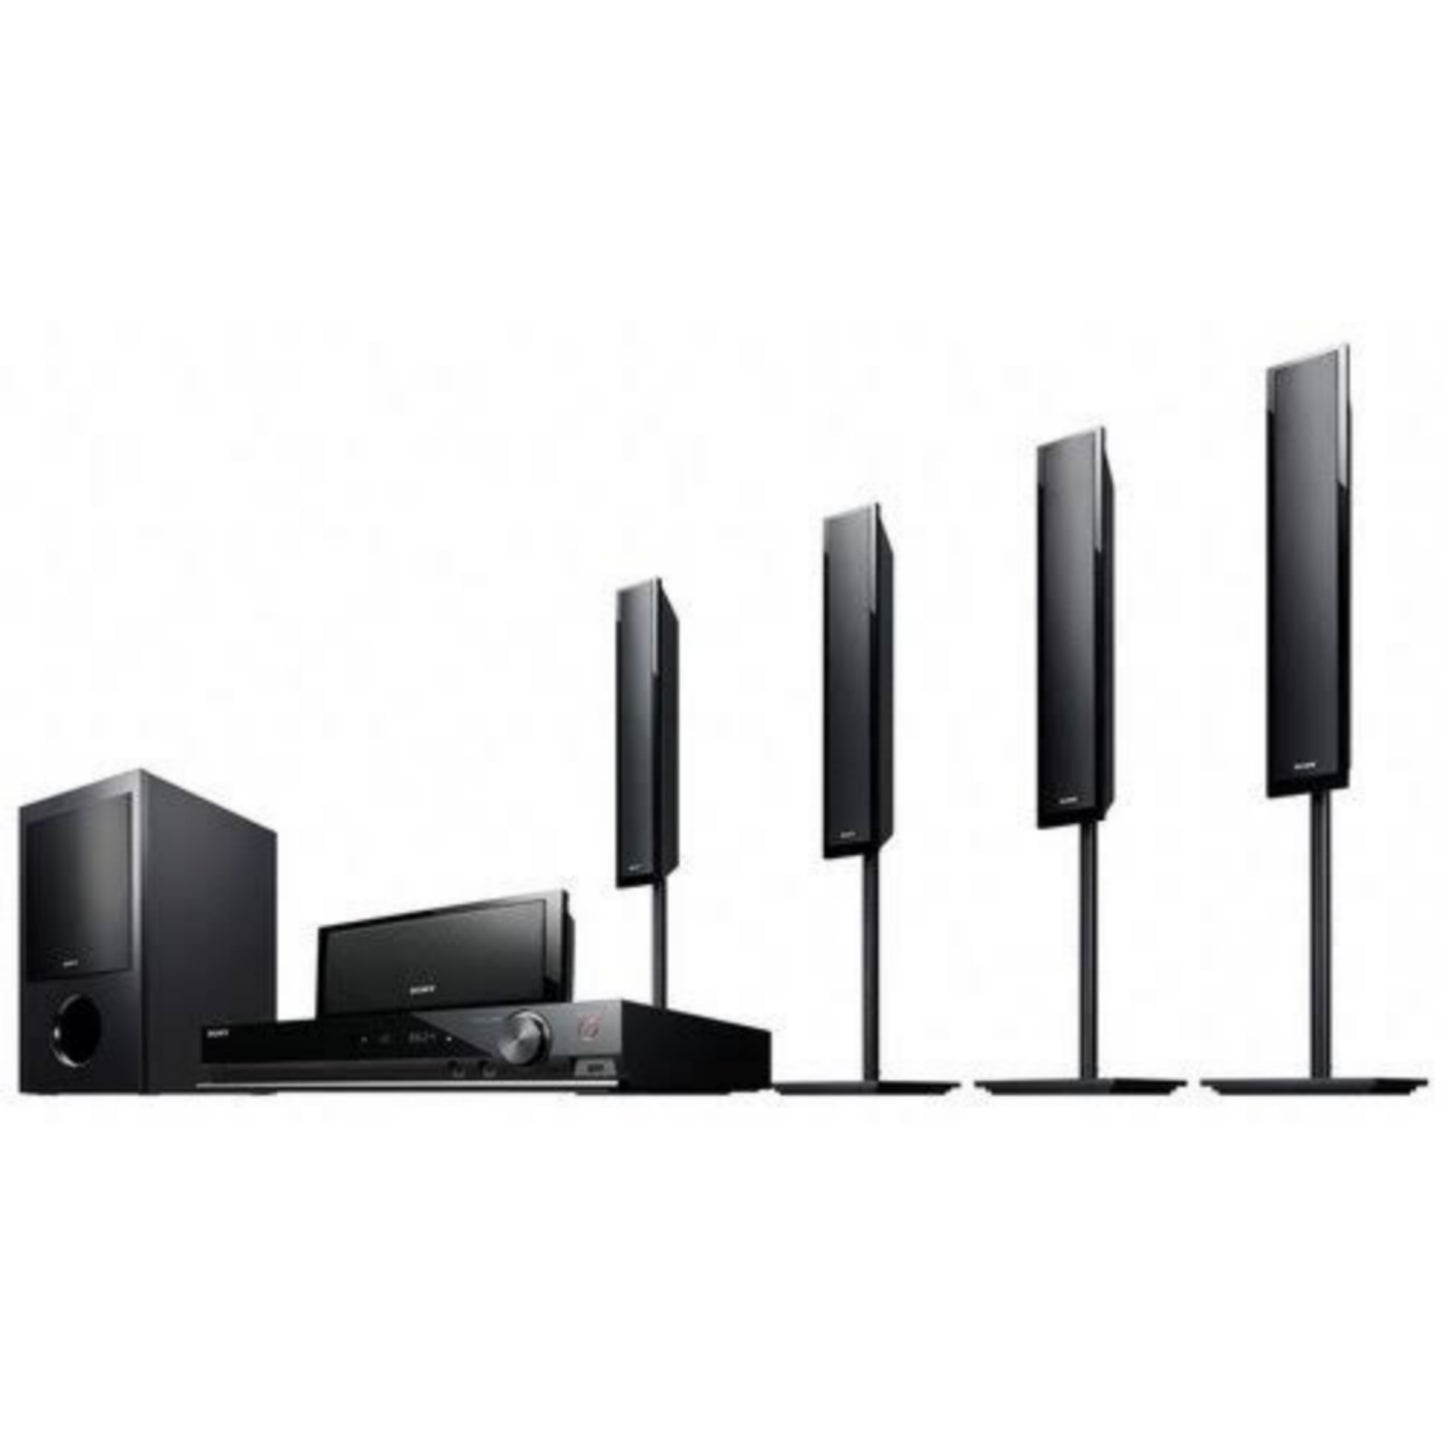 Sony DAV-TZ710 5.1Ch 600 watts Standing DVD Home Theater System - London Used